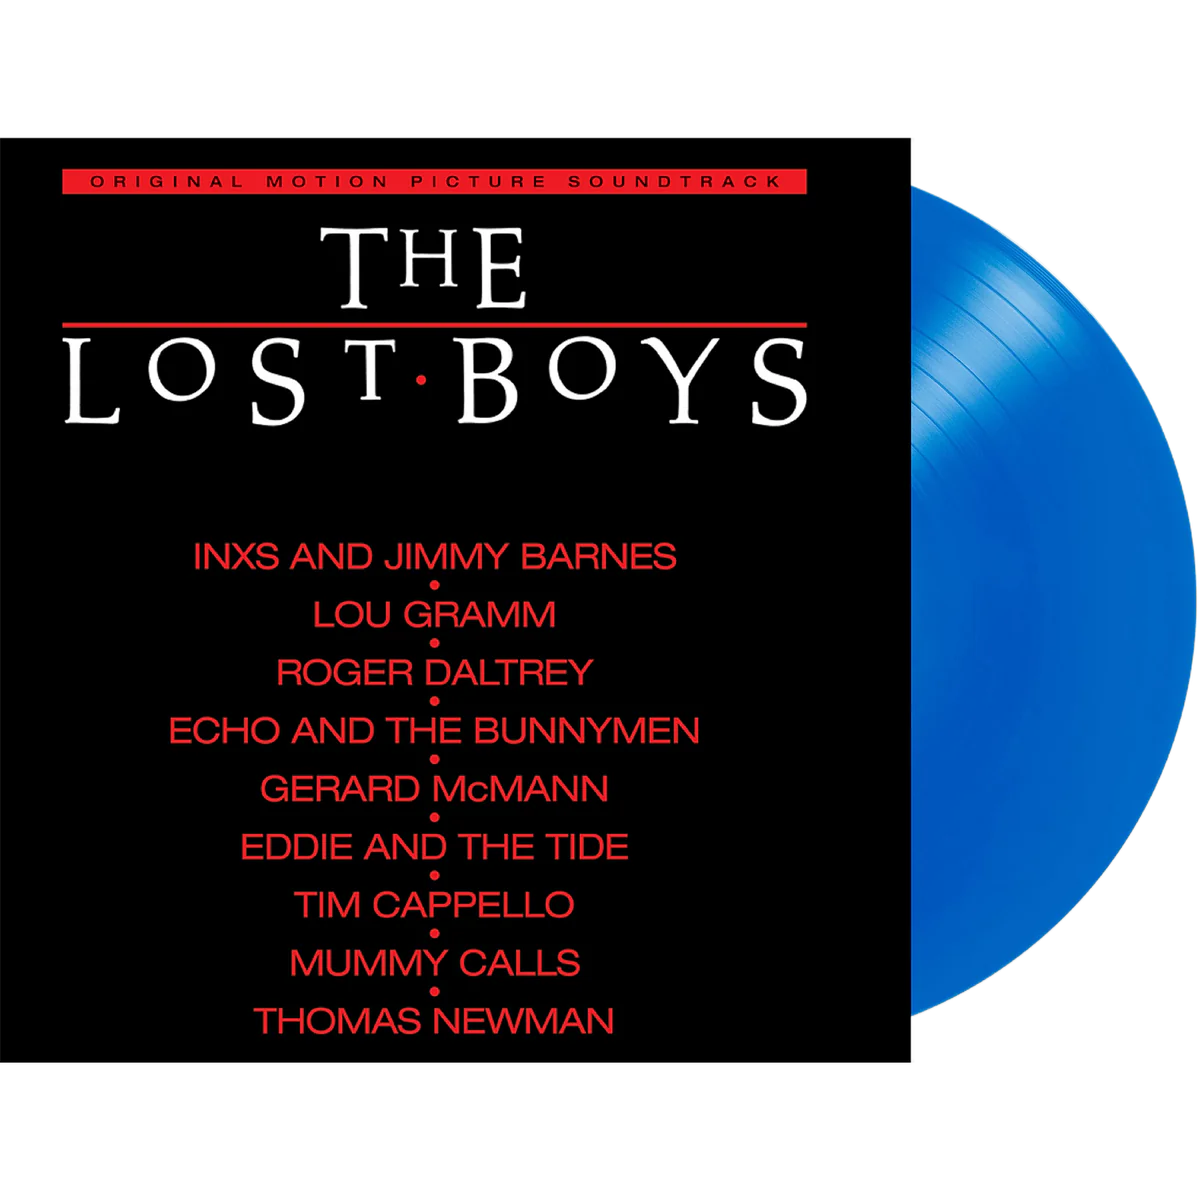 Order Various Artists - The Lost Boys Original Motion Picture Soundtrack (Limited Edition Midnight Blue Vinyl)